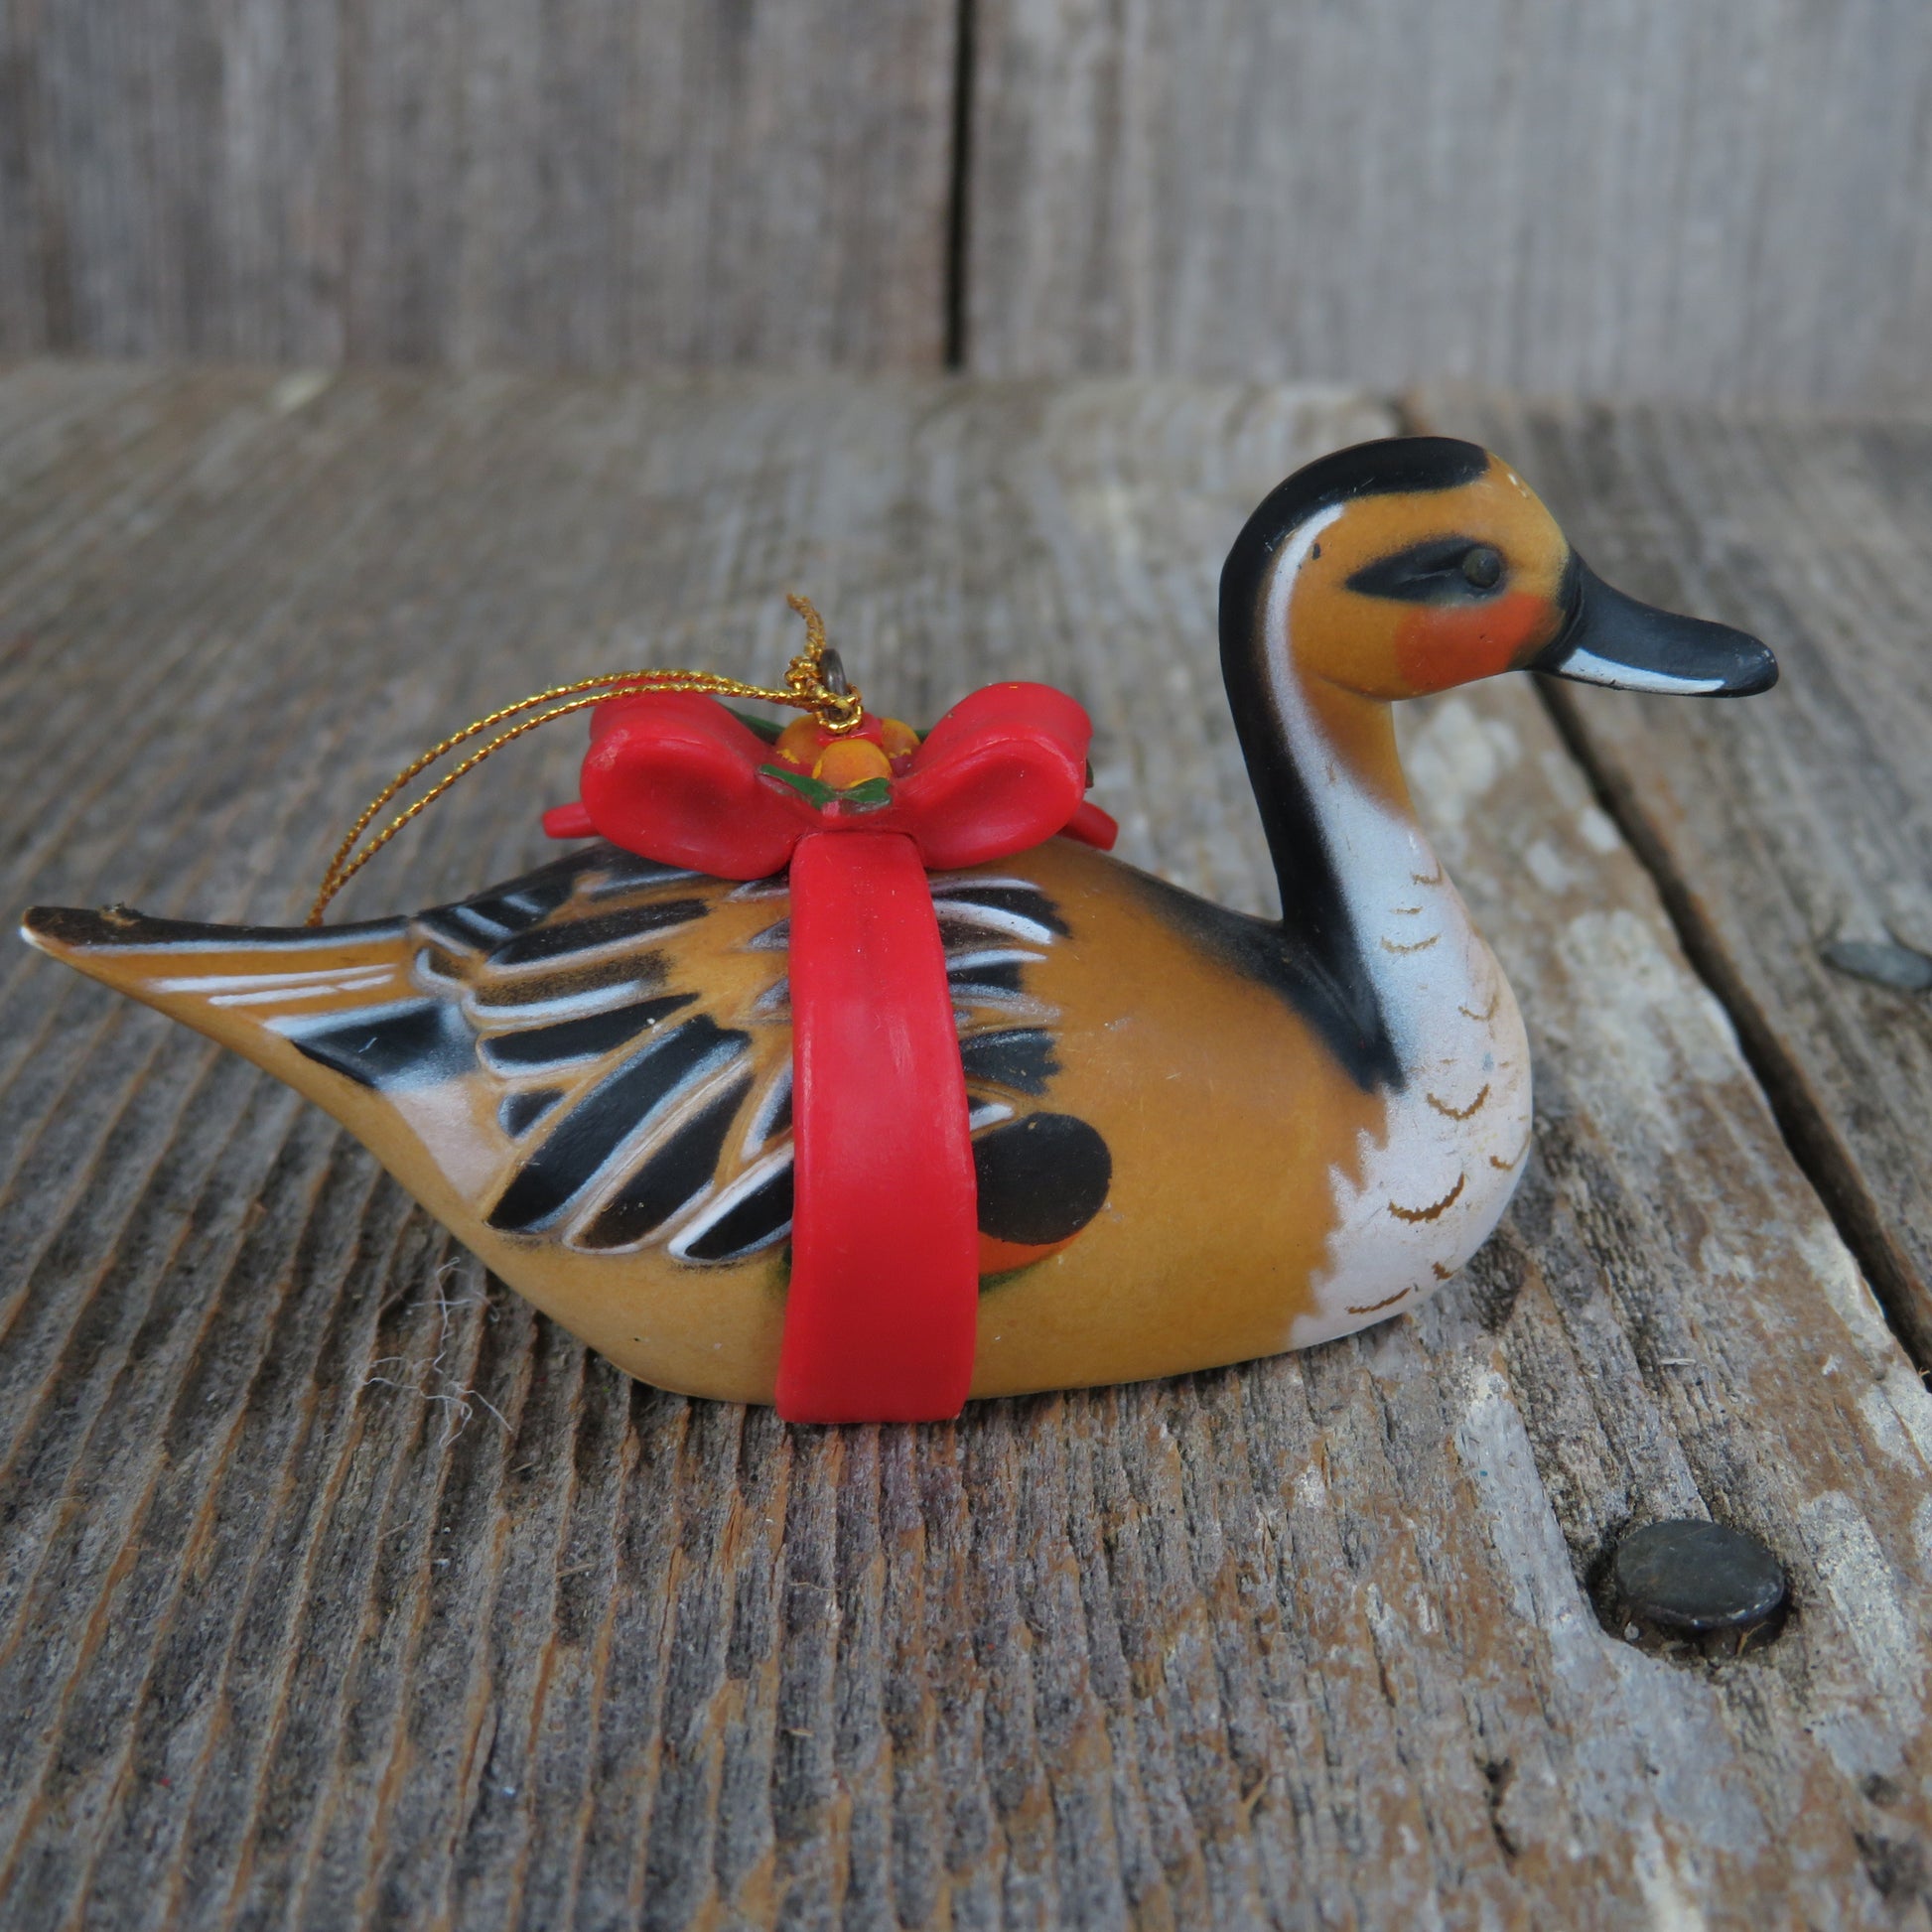 Vintage Duck Ornament Fulvous Whistling Red Bow Bird Christmas Yellow Decoy Hong Kong - At Grandma's Table